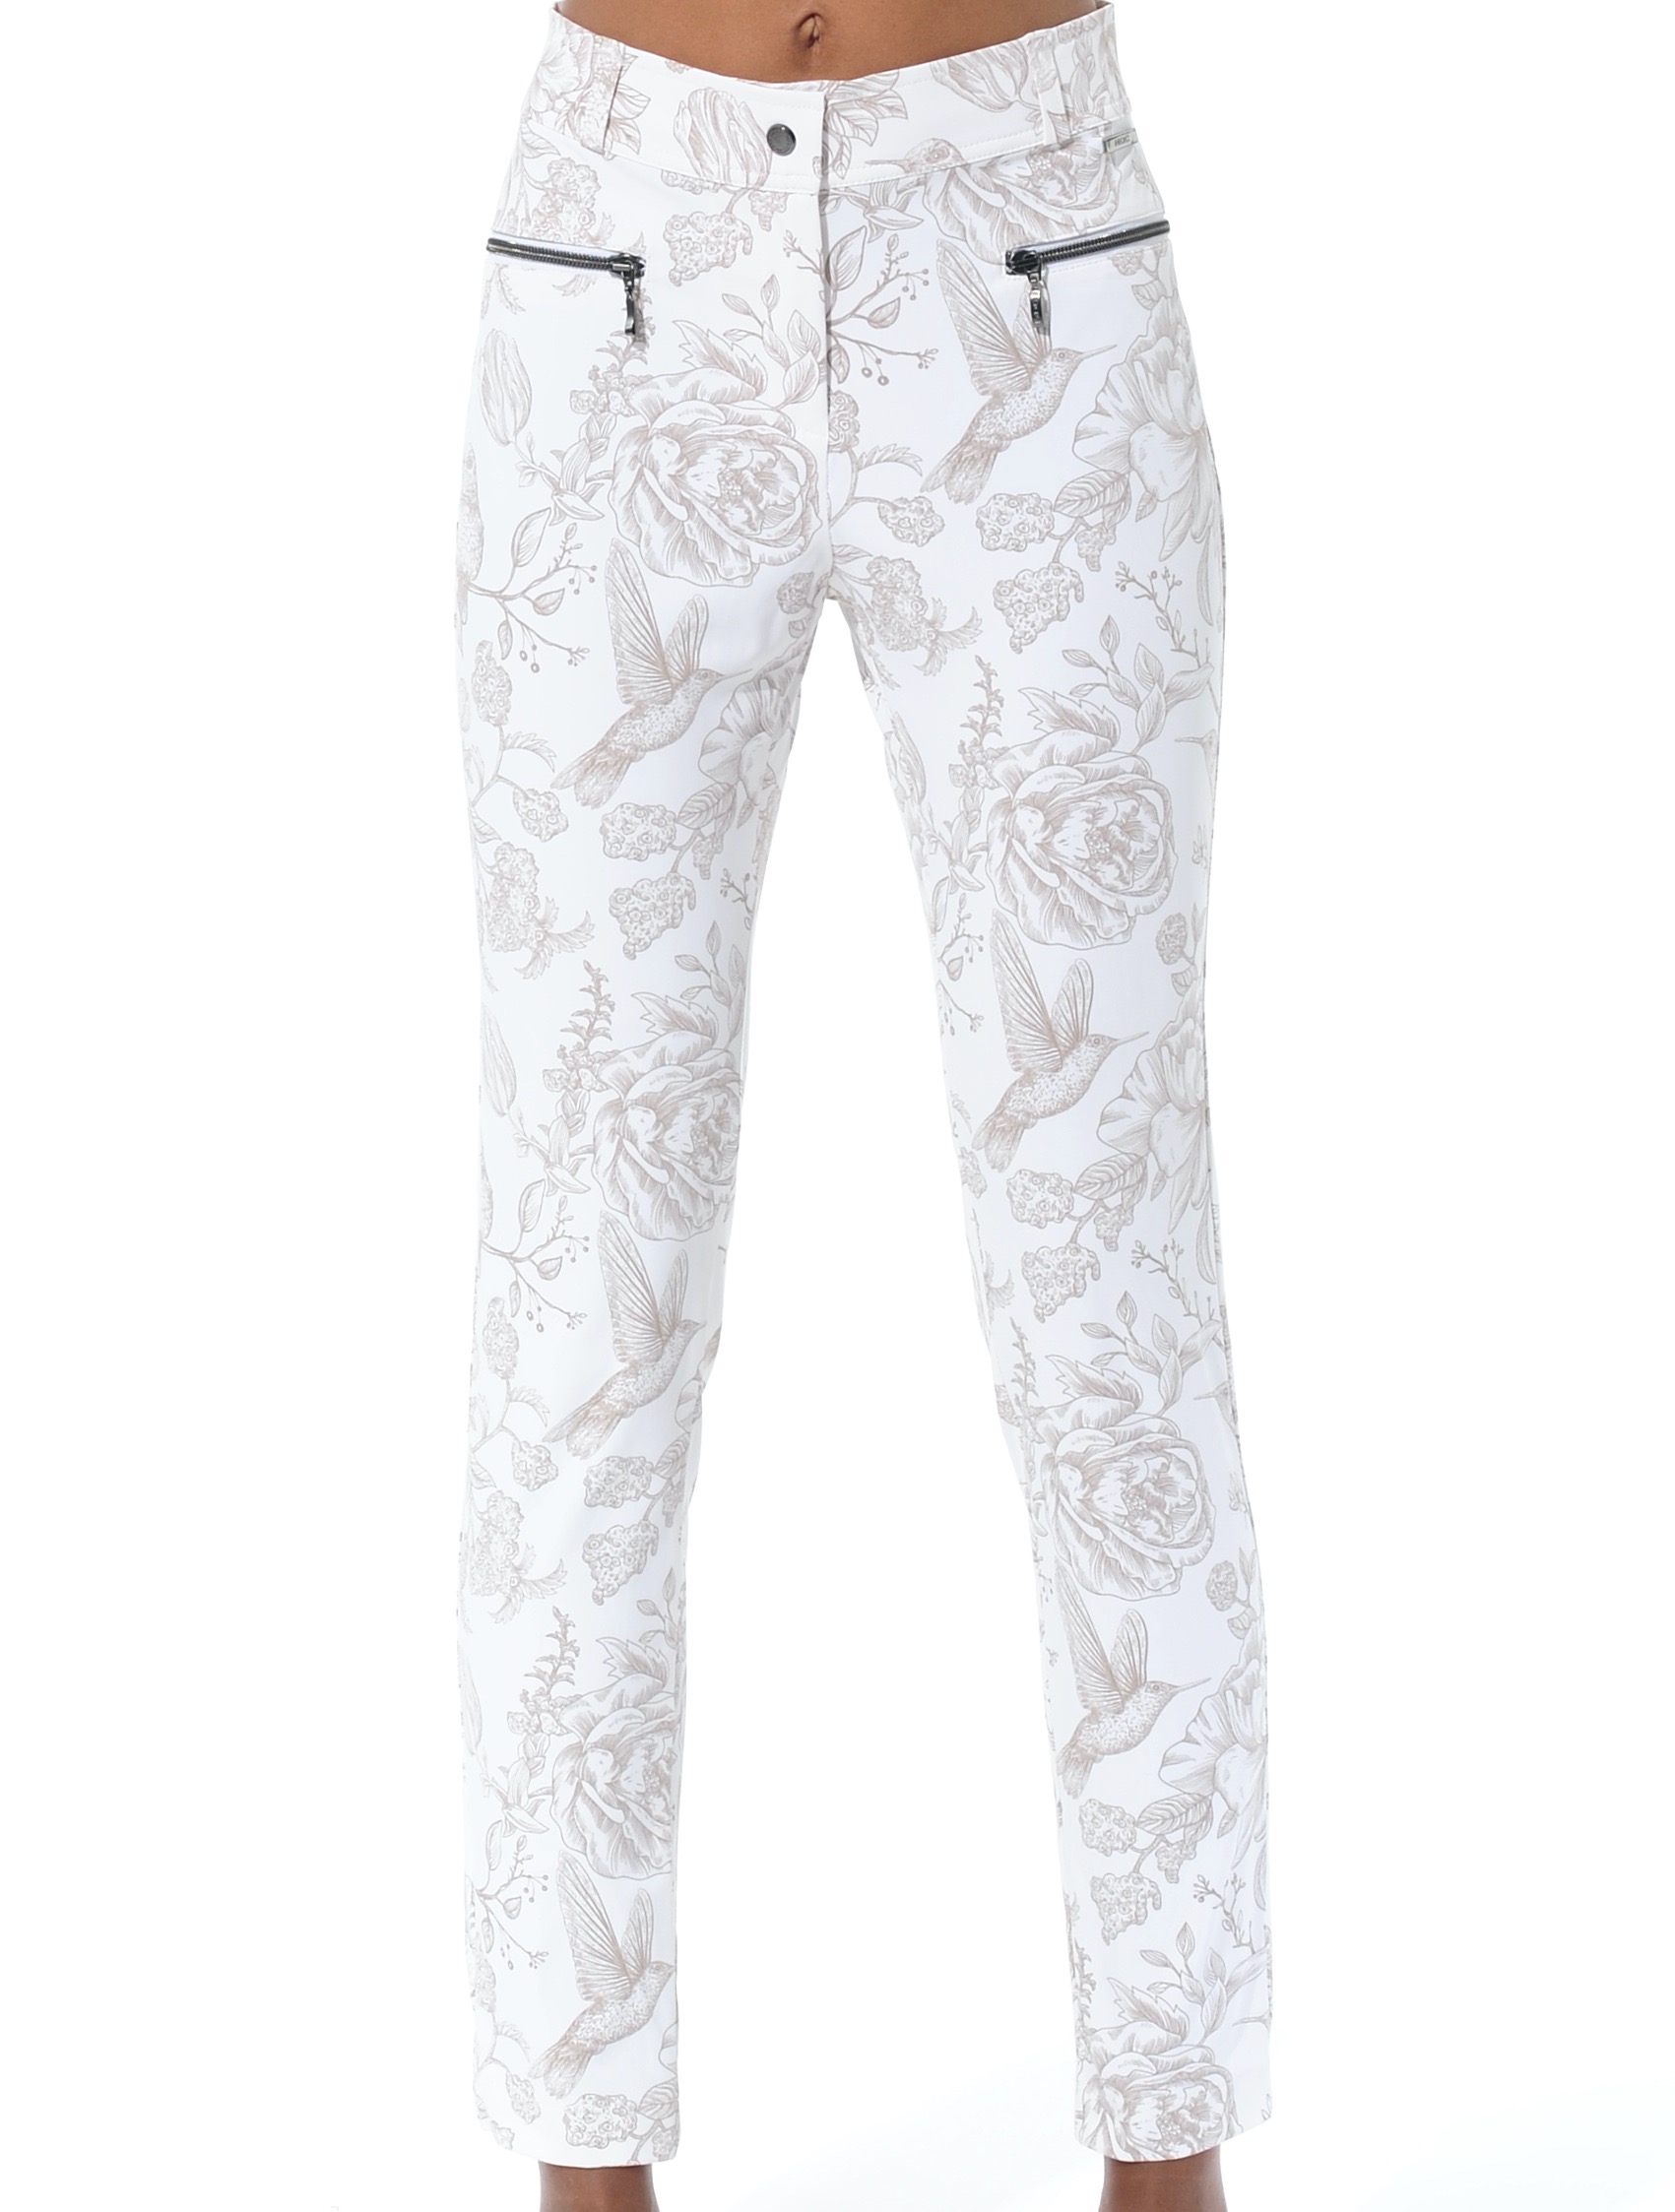 4way stretch print jeggings taupe 